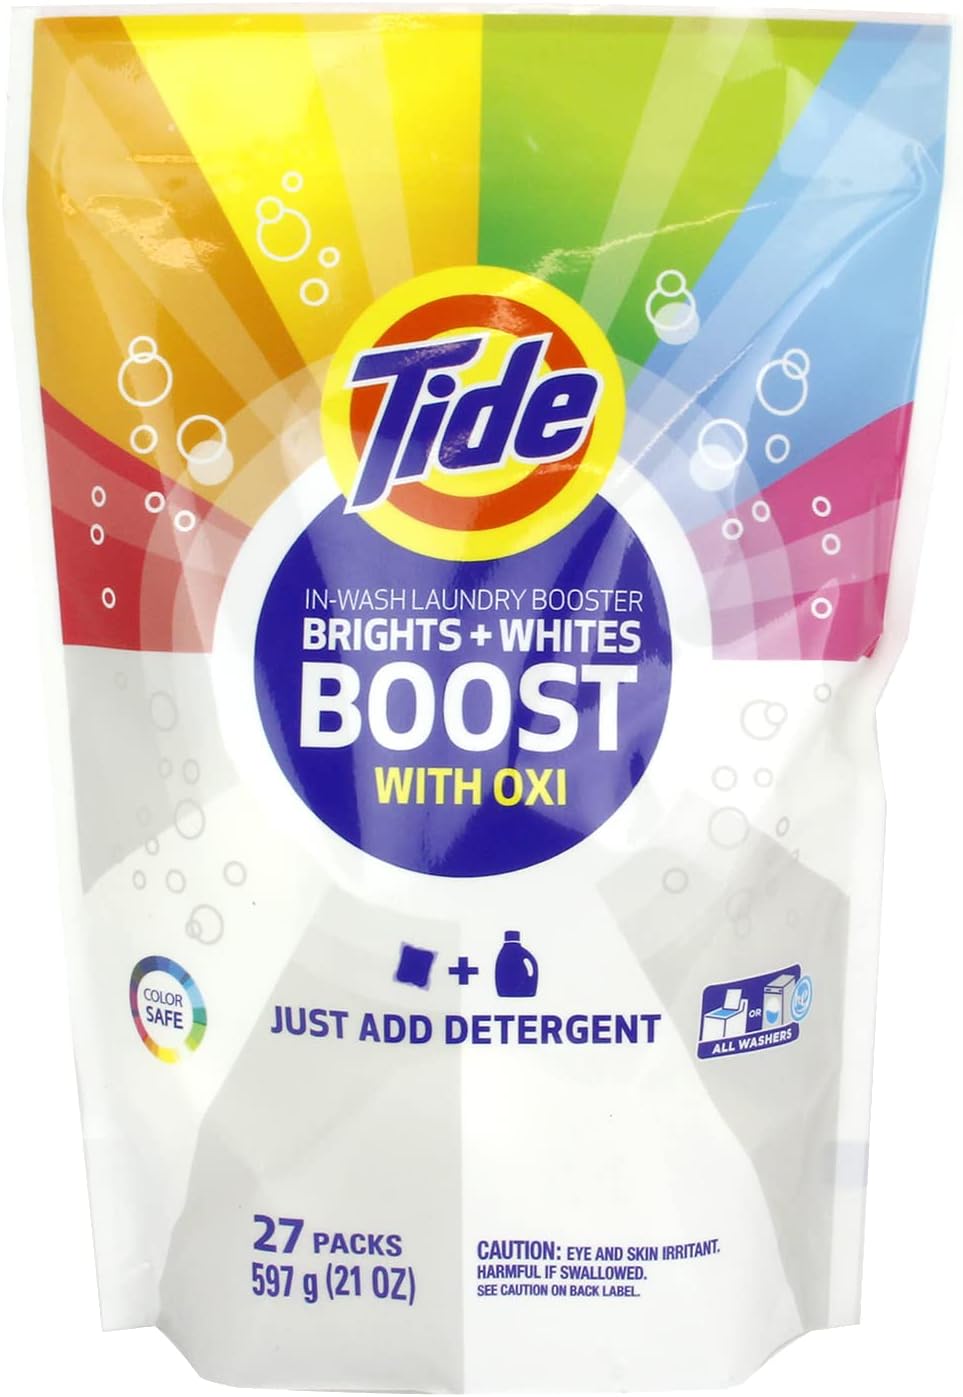 Tide Bright + Whites Rescue In-wash Laundry Booster [...]